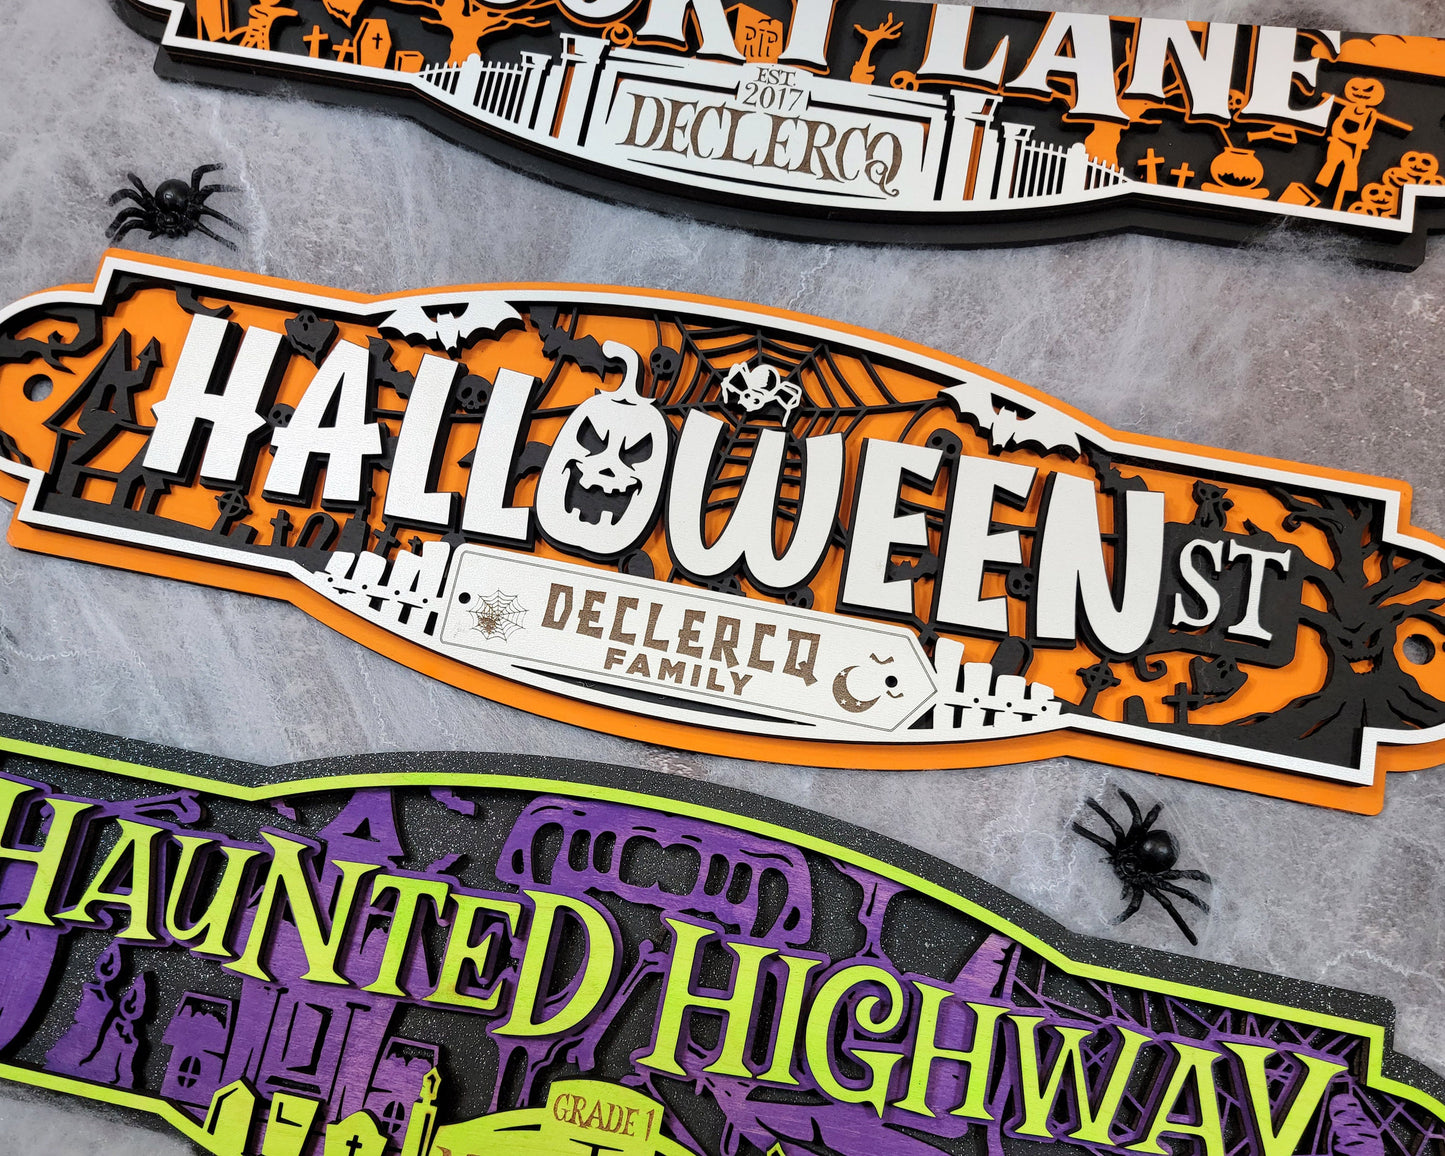 Spooktacular Halloween Street Signs - 3 Street Signs Designs Included - SVG File Download - Sized & Tested in Glowforge